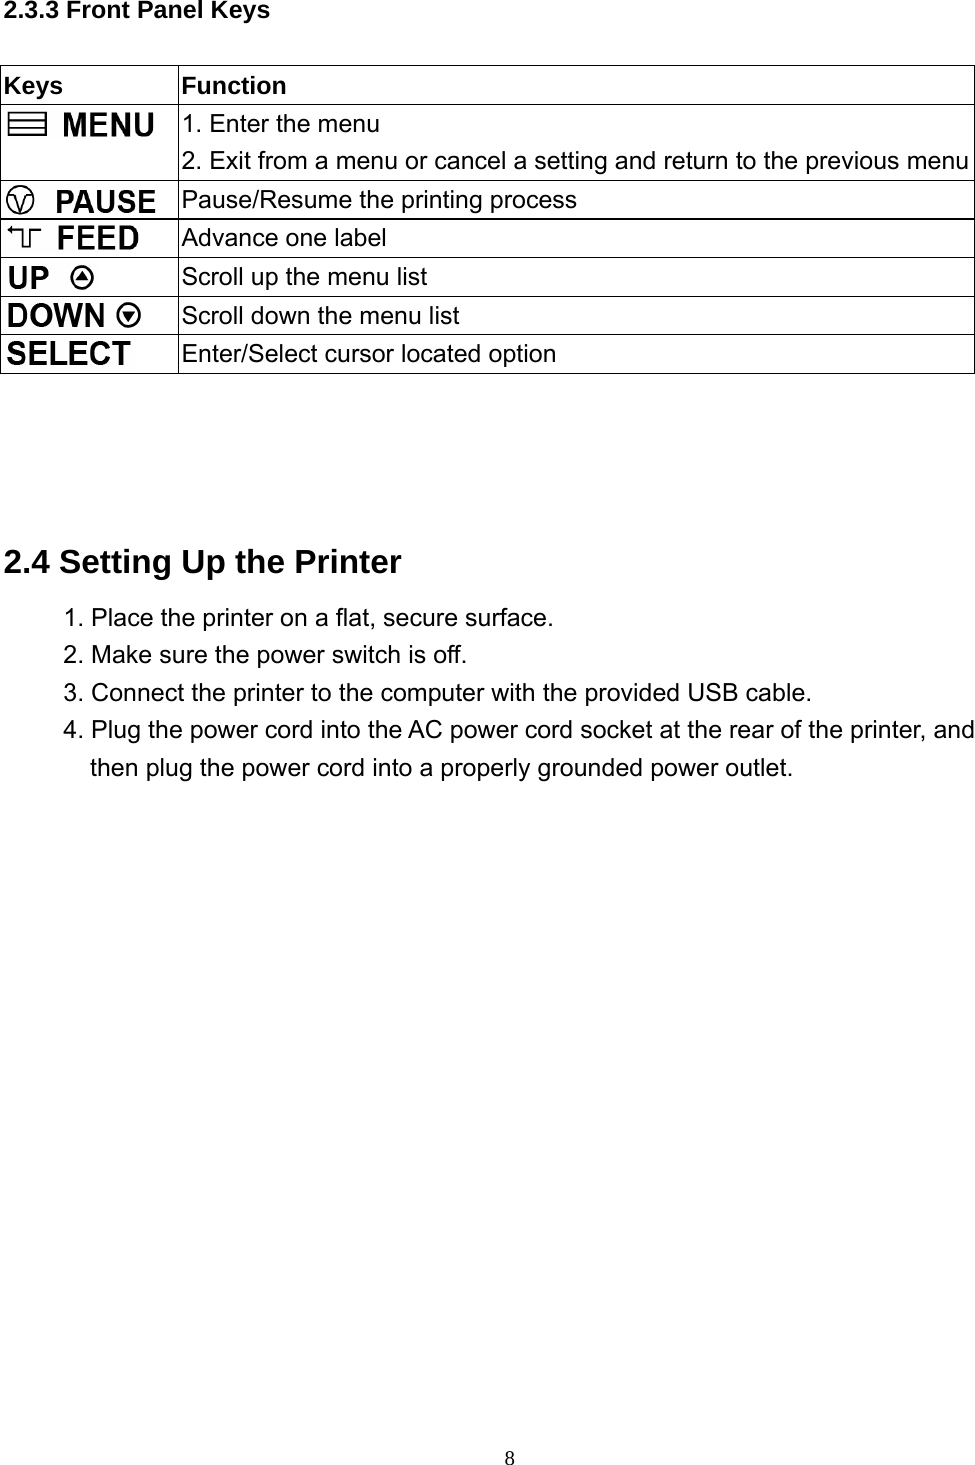  8  2.3.3 Front Panel Keys  Keys Function  1. Enter the menu 2. Exit from a menu or cancel a setting and return to the previous menu Pause/Resume the printing process  Advance one label  Scroll up the menu list  Scroll down the menu list  Enter/Select cursor located option     2.4 Setting Up the Printer 1. Place the printer on a flat, secure surface. 2. Make sure the power switch is off. 3. Connect the printer to the computer with the provided USB cable. 4. Plug the power cord into the AC power cord socket at the rear of the printer, and then plug the power cord into a properly grounded power outlet.  